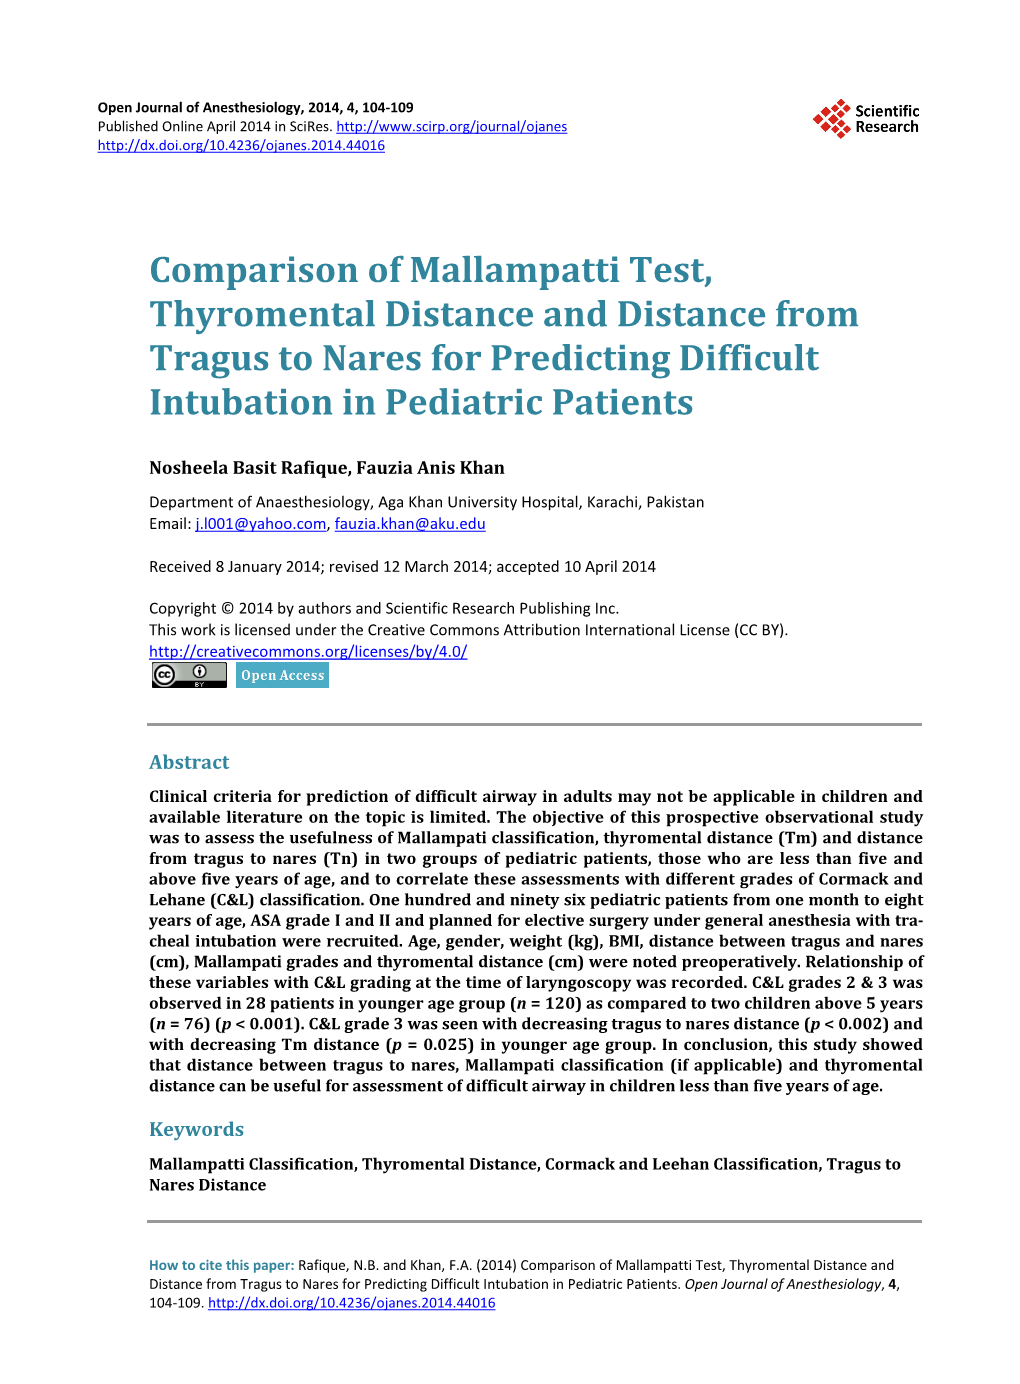 Comparison of Mallampatti Test, Thyromental Distance and Distance from Tragus to Nares for Predicting Difficult Intubation in Pediatric Patients